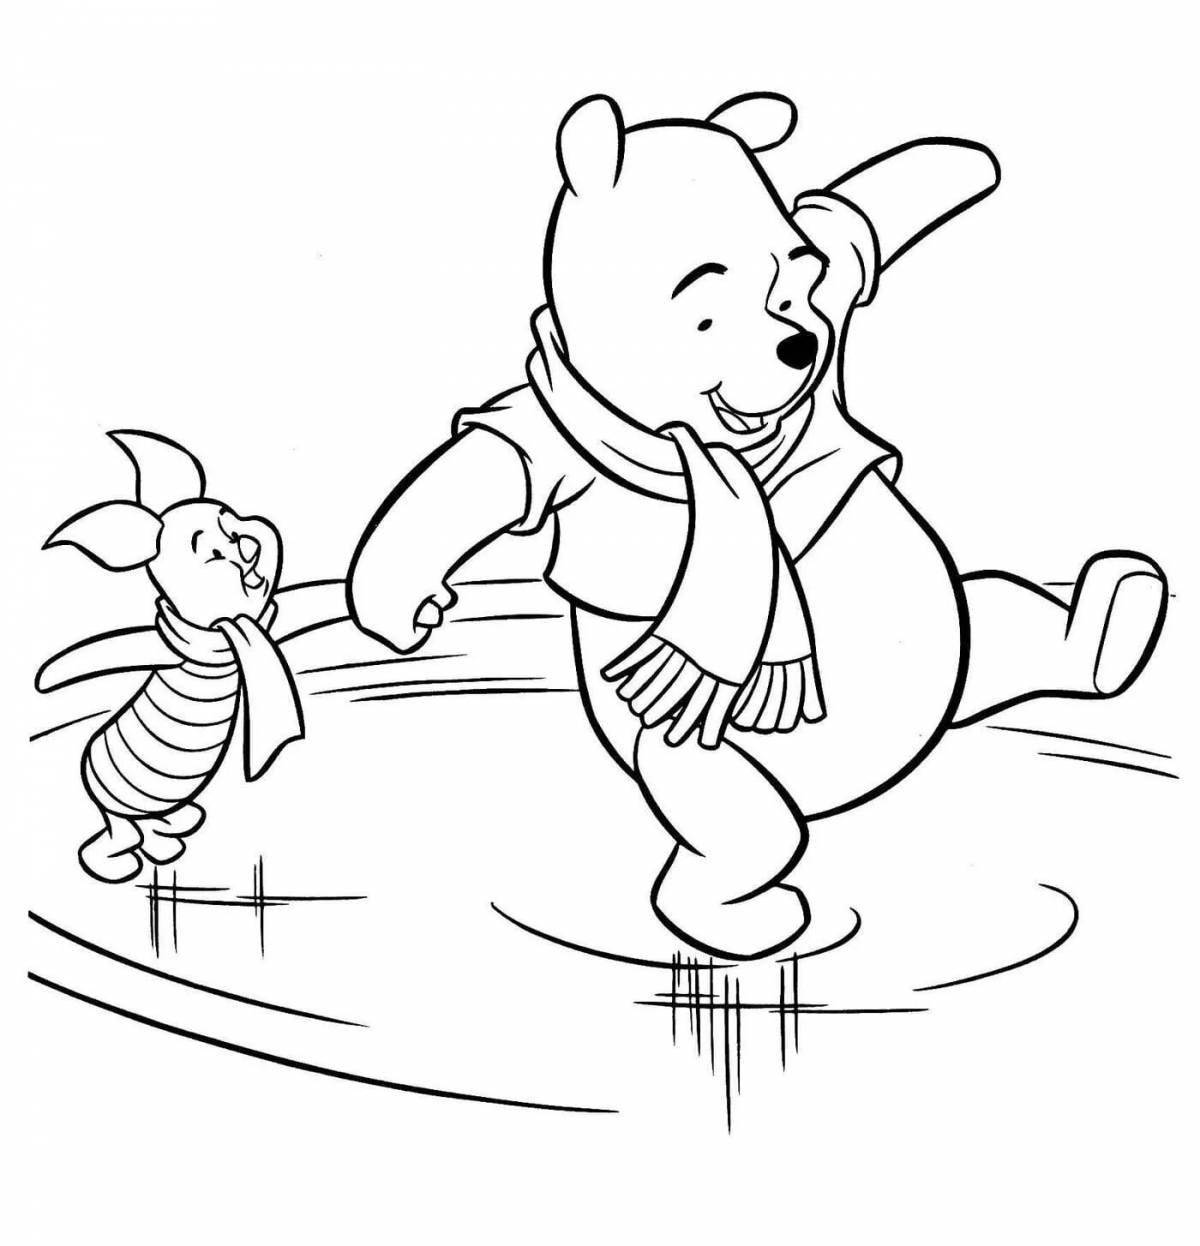 Colorful ice safety coloring page for kids